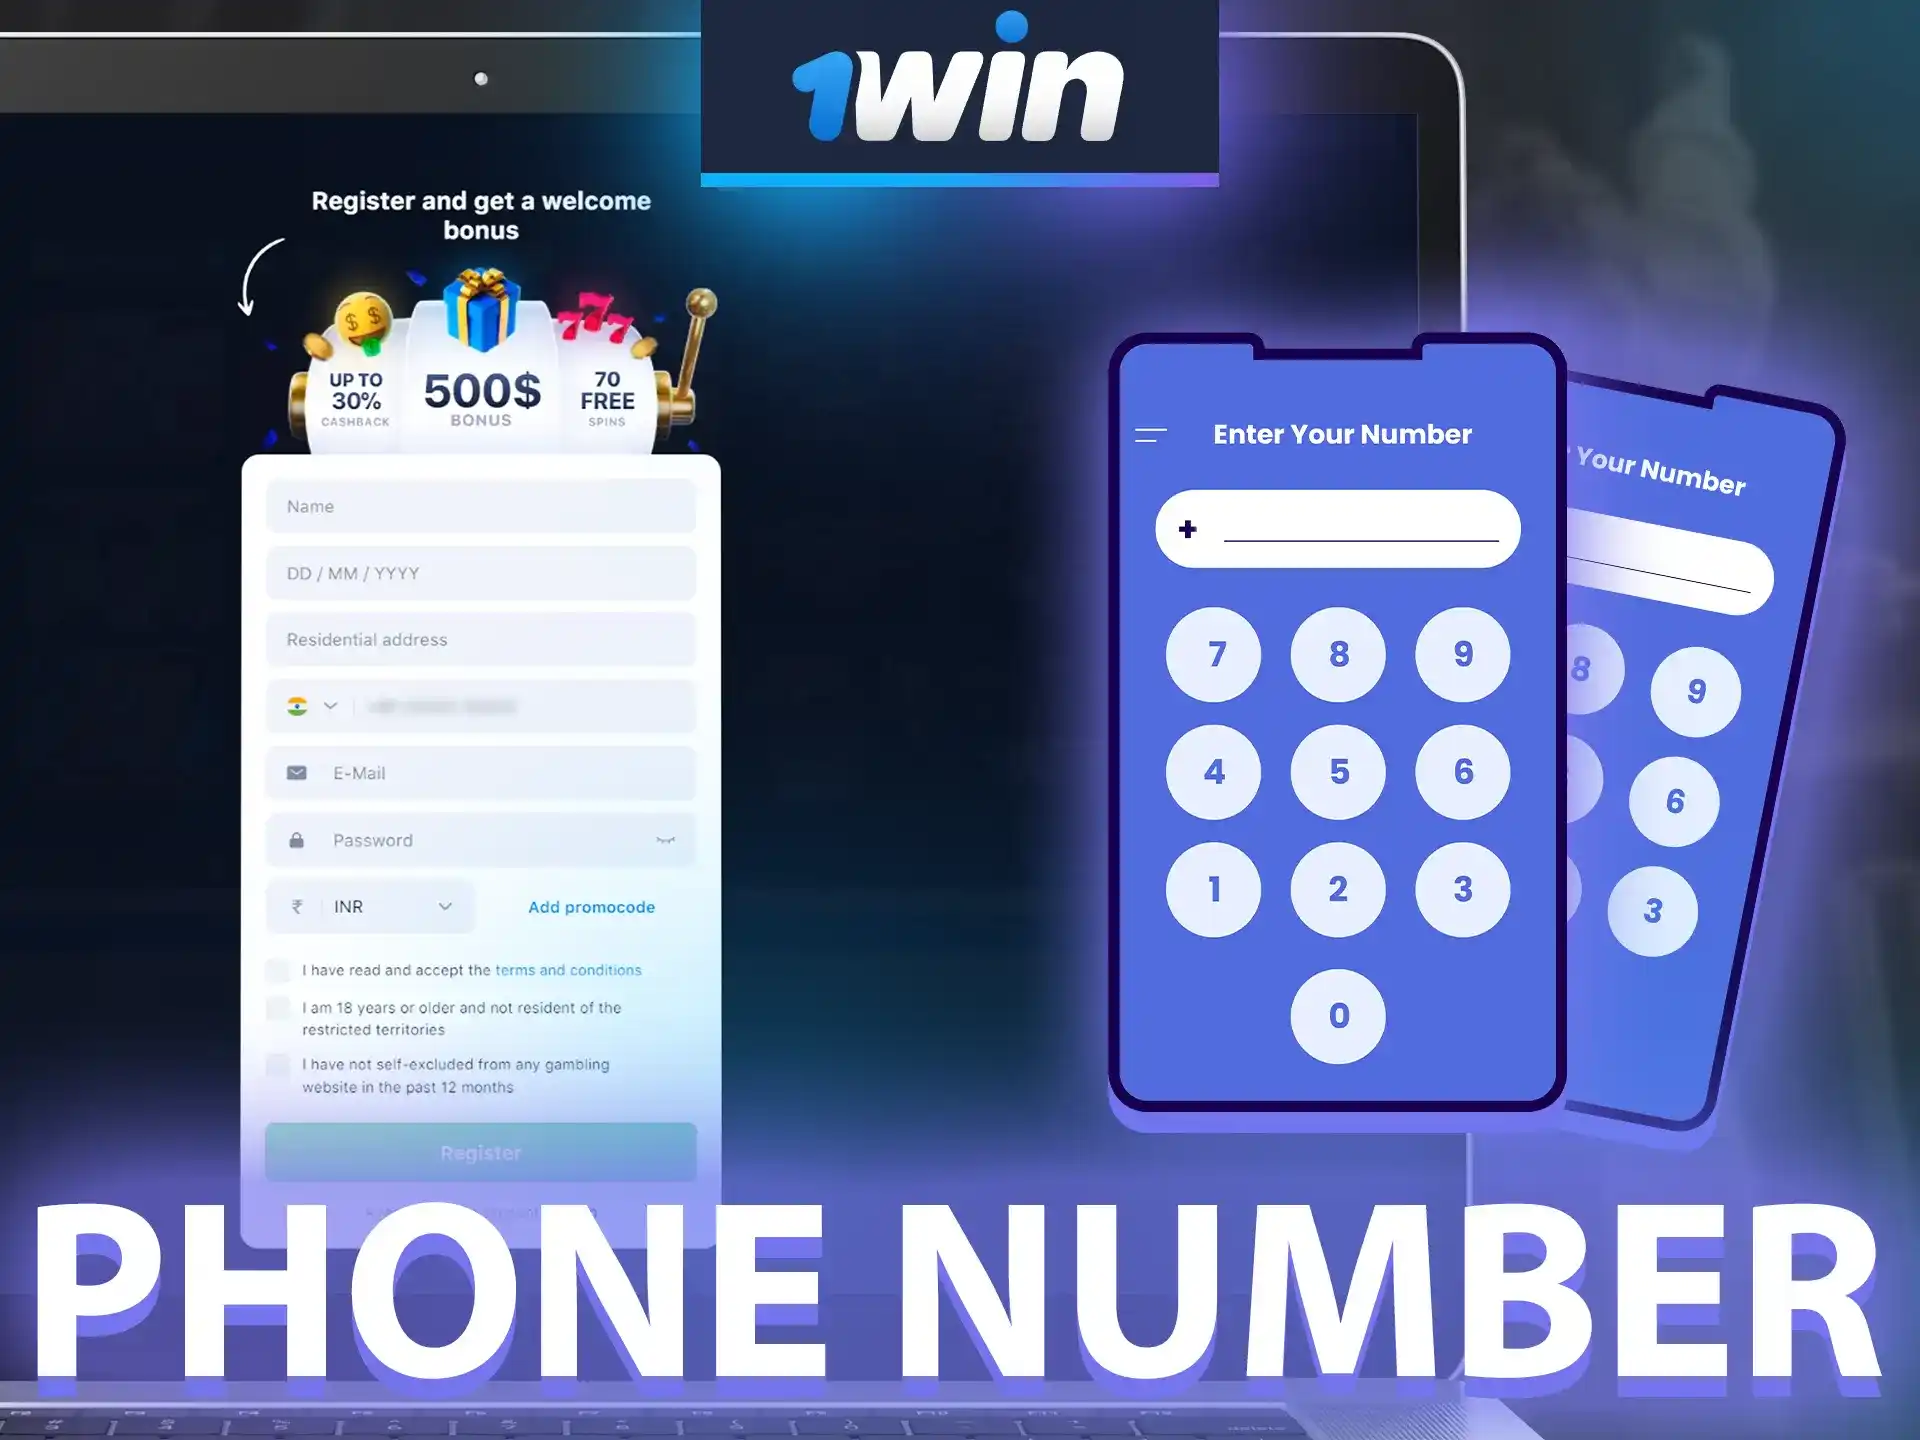 Register on the 1win platform using your phone number.